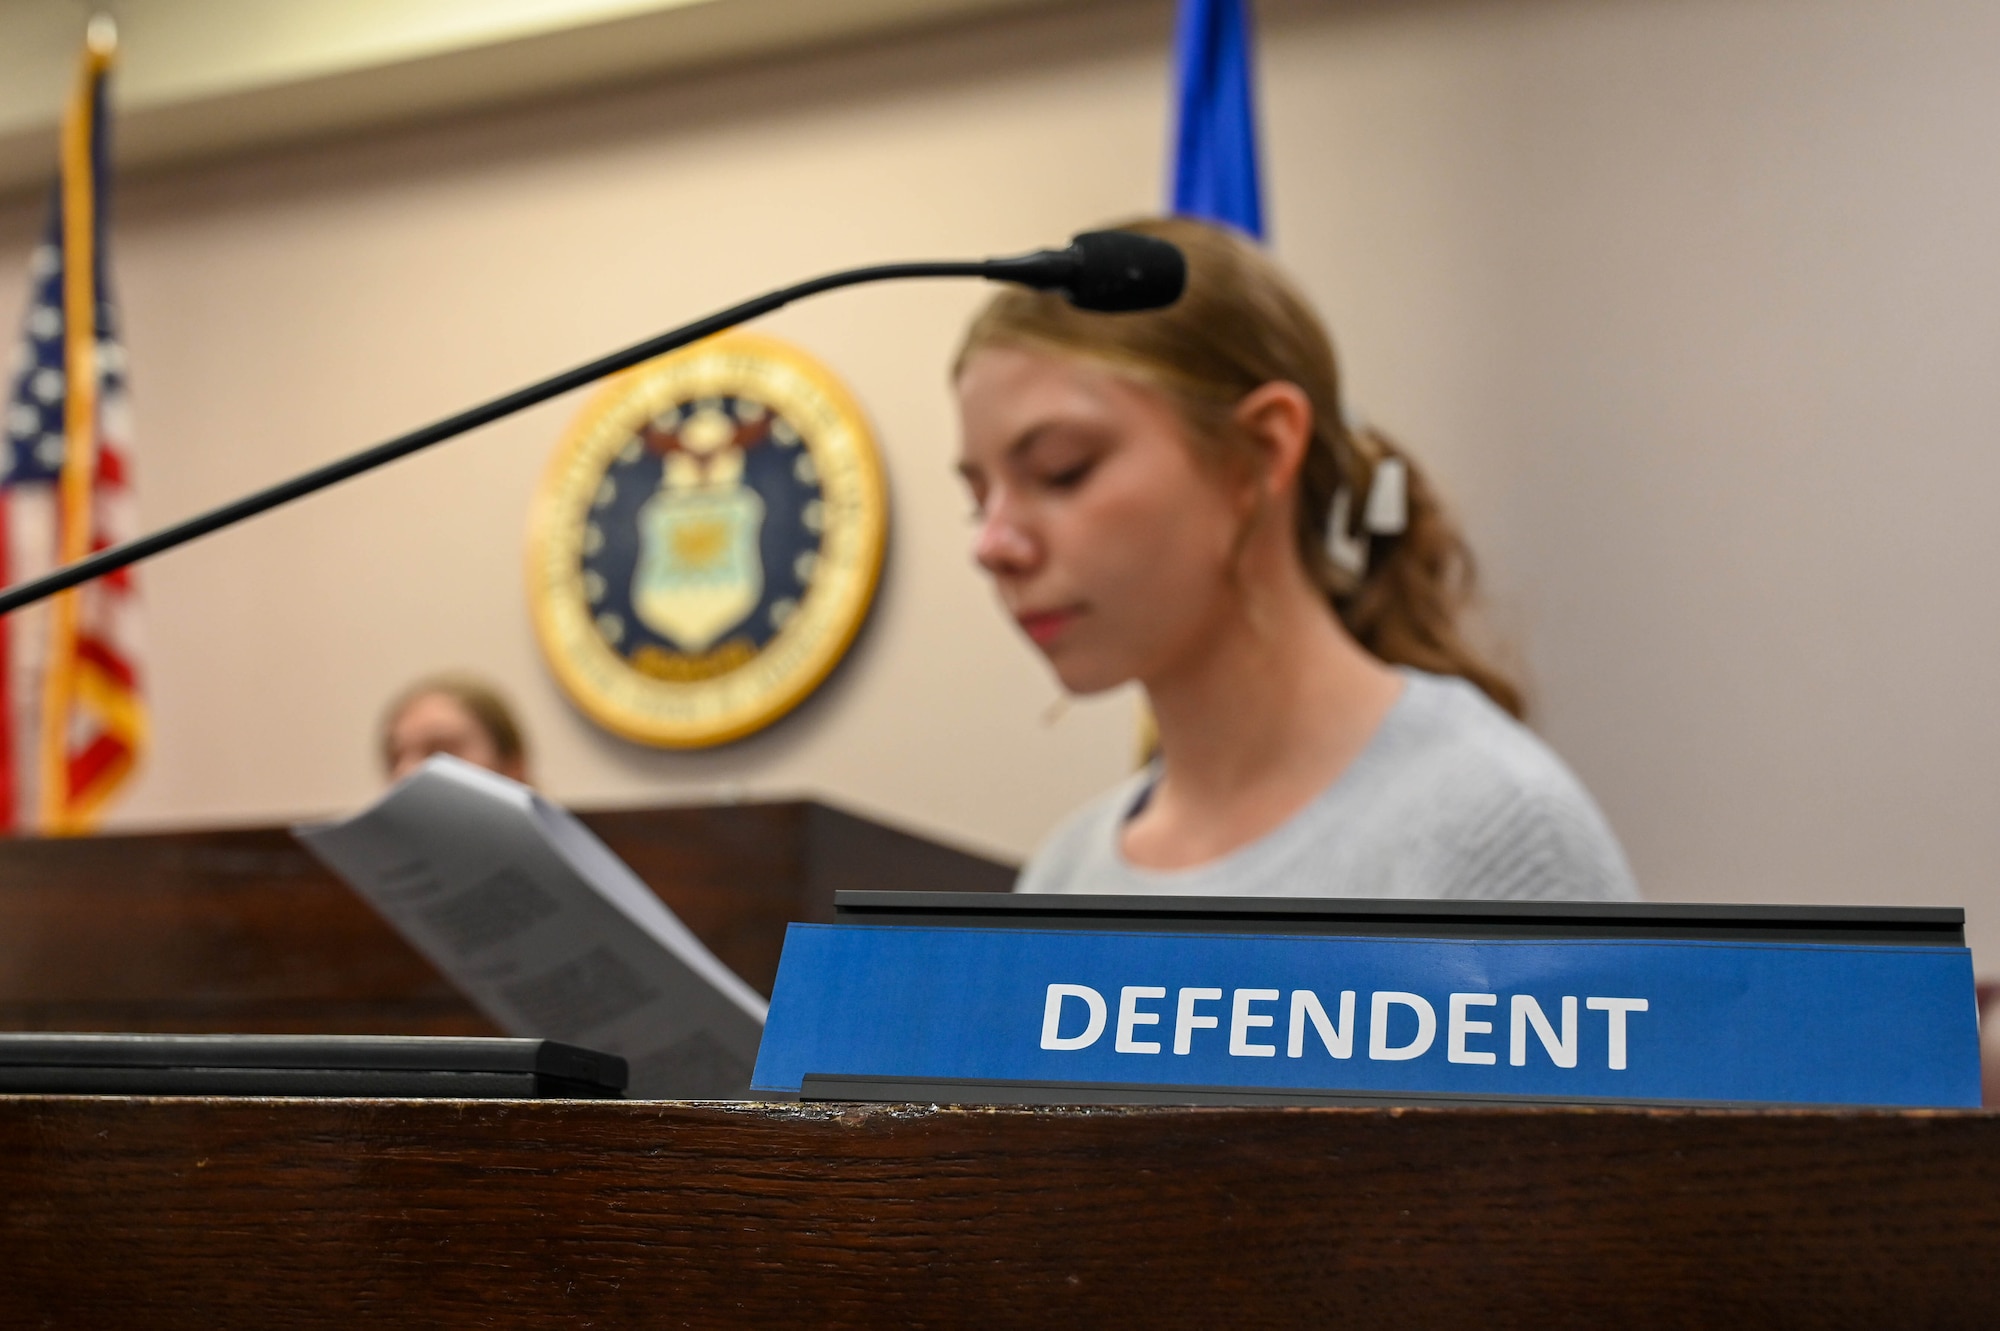 An identification tag is displayed during a mock trial on National Law Day at Altus Air Force Base, Oklahoma, May 1, 2023. National Law Day provides an opportunity to understand how law and the legal process protect liberty, strive to achieve justice and contribute to the freedoms that all Americans share. (U.S. Air Force photo by Senior Airman Trenton Jancze)